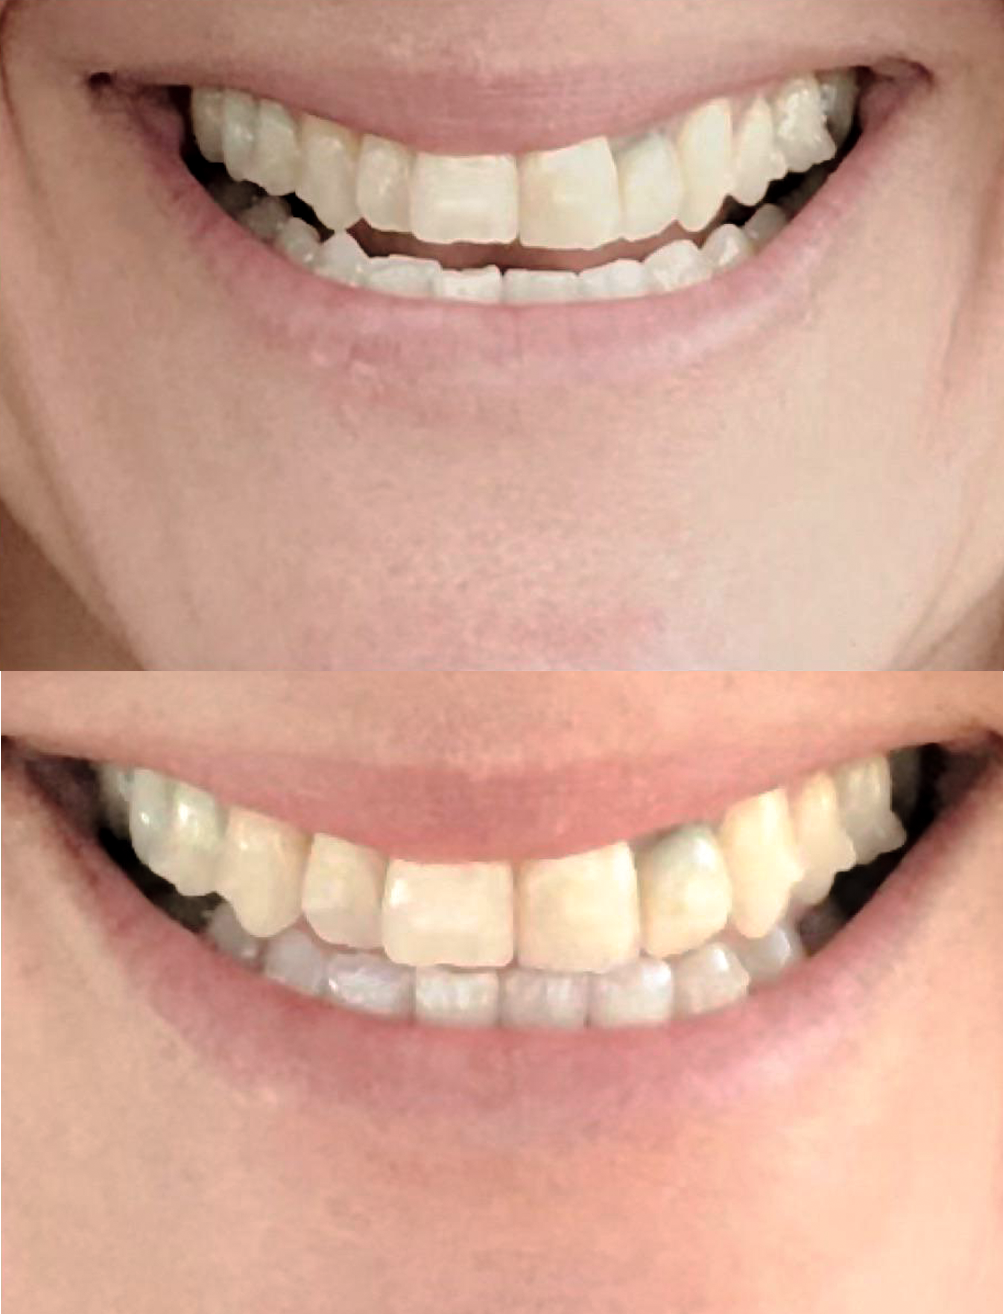 Crossbite before and after mewing